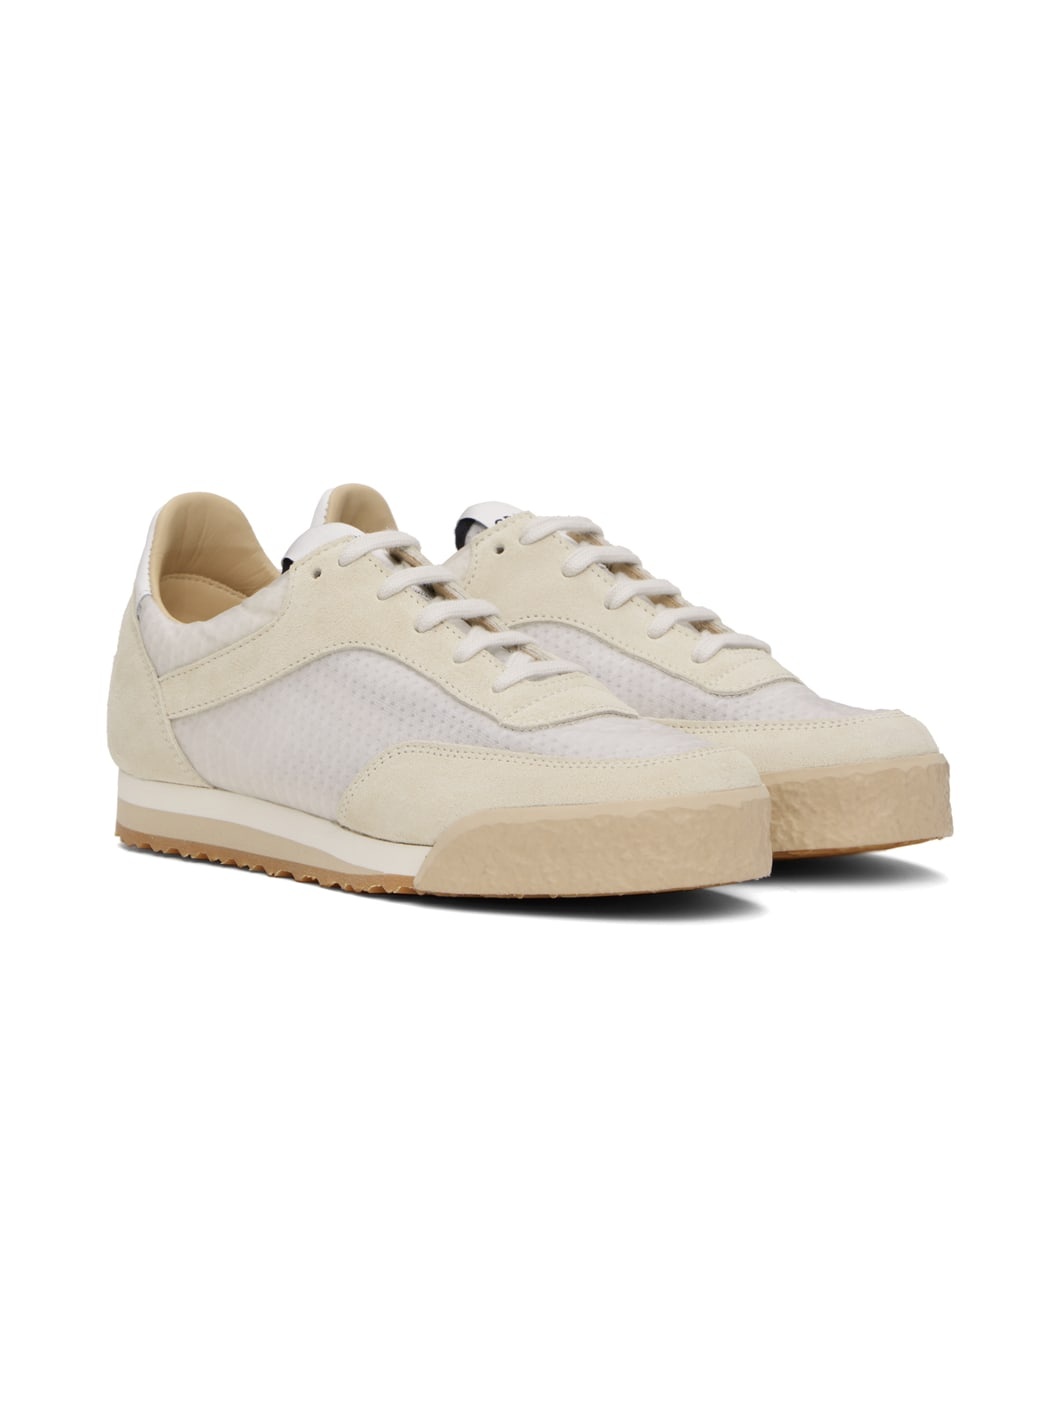 White & Beige Pitch Low Sneakers - 4